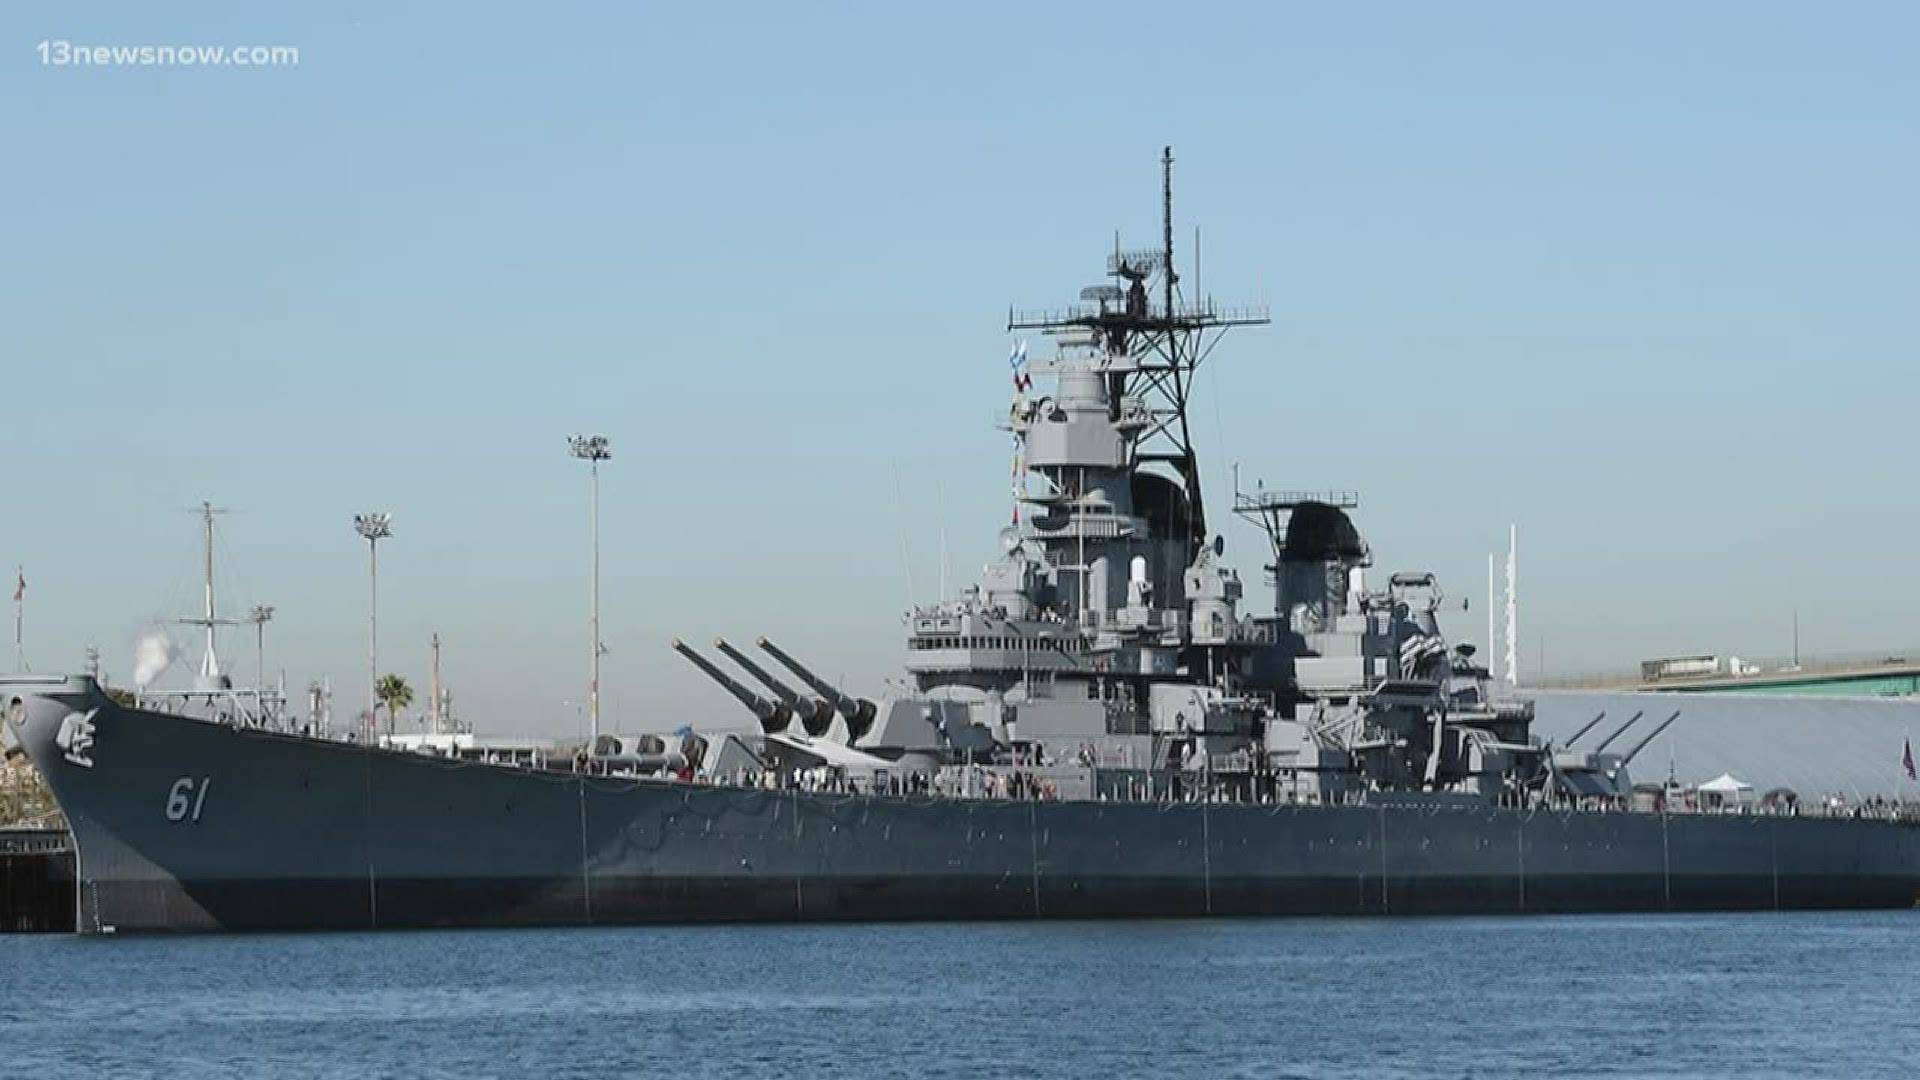 In April 1989, a turret on the USS Iowa exploded, killing almost 50 people on board. Years later, a survivor remembers the recovery efforts of that day.